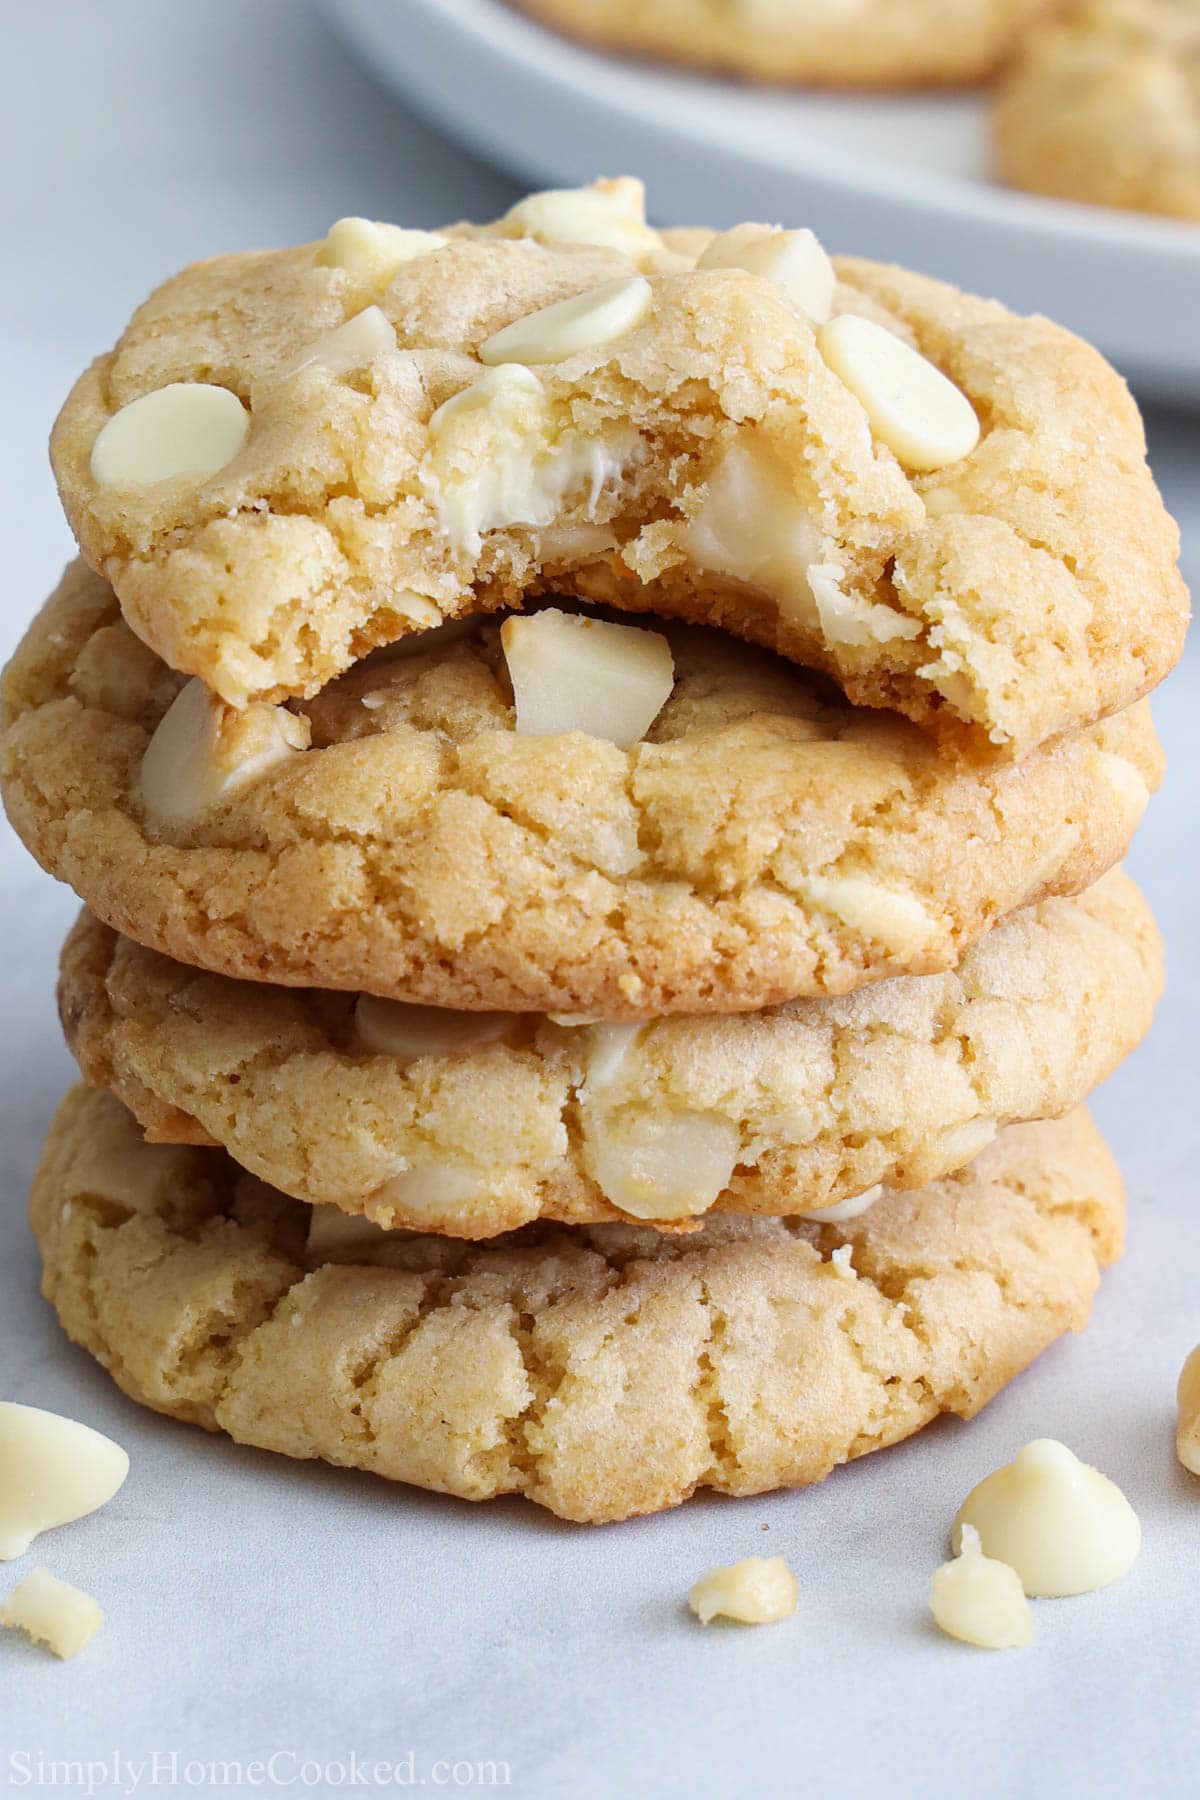 Vertical image of a stack of White Chocolate Macadamia Nut Cookies, one missing a bite.